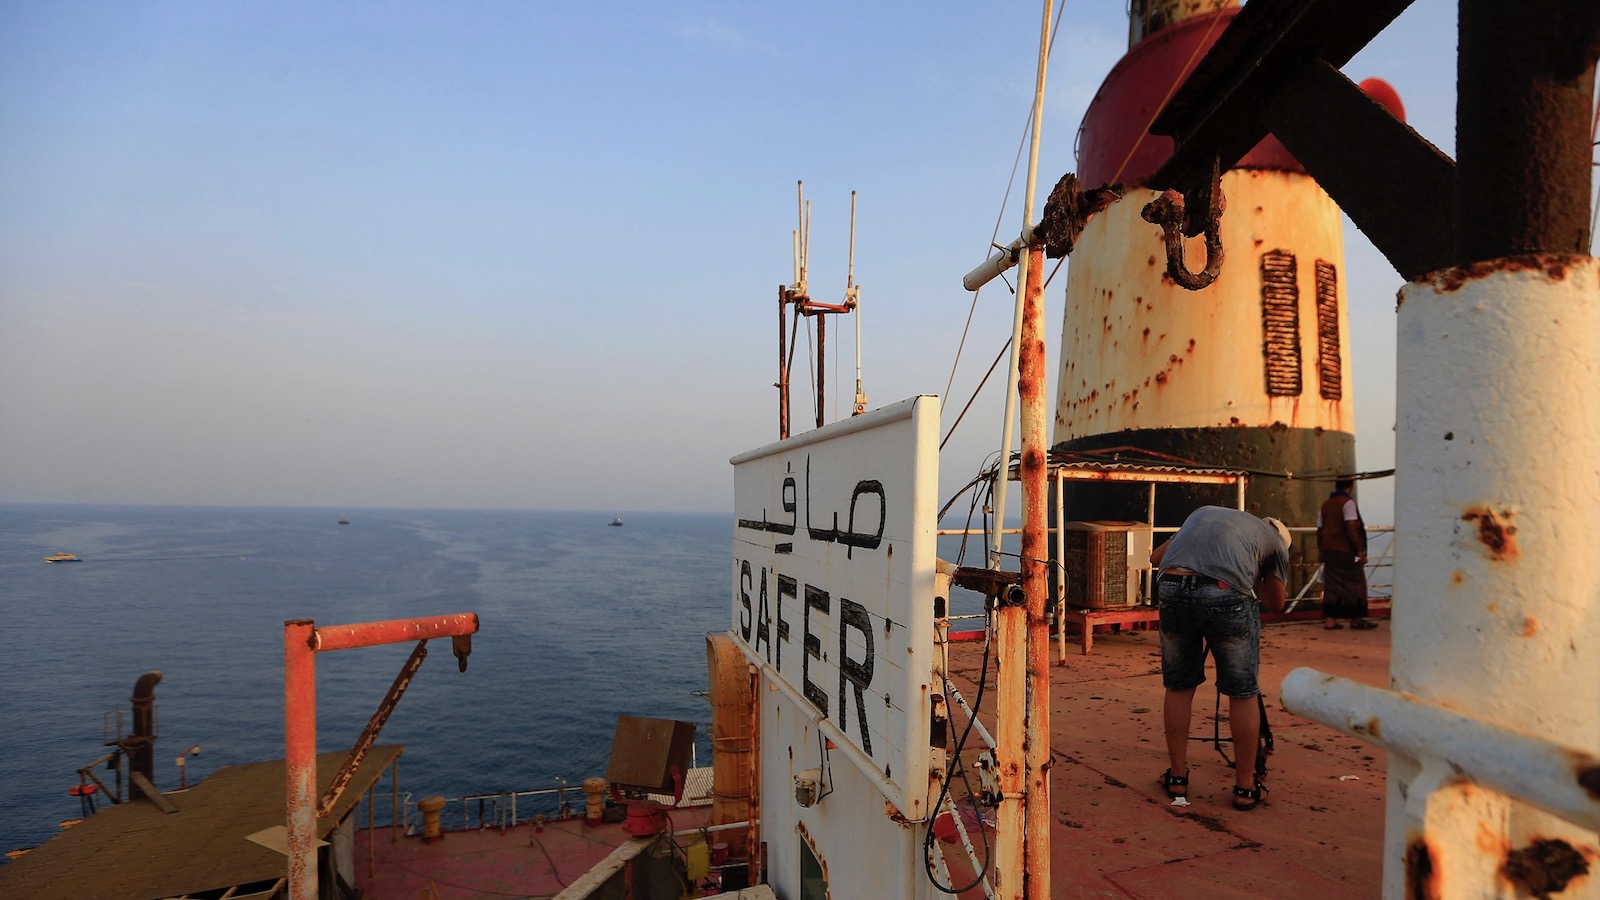 A crew member stands on the deck of the FSO Safer, a rusting and decaying oil tanker in the Red Sea